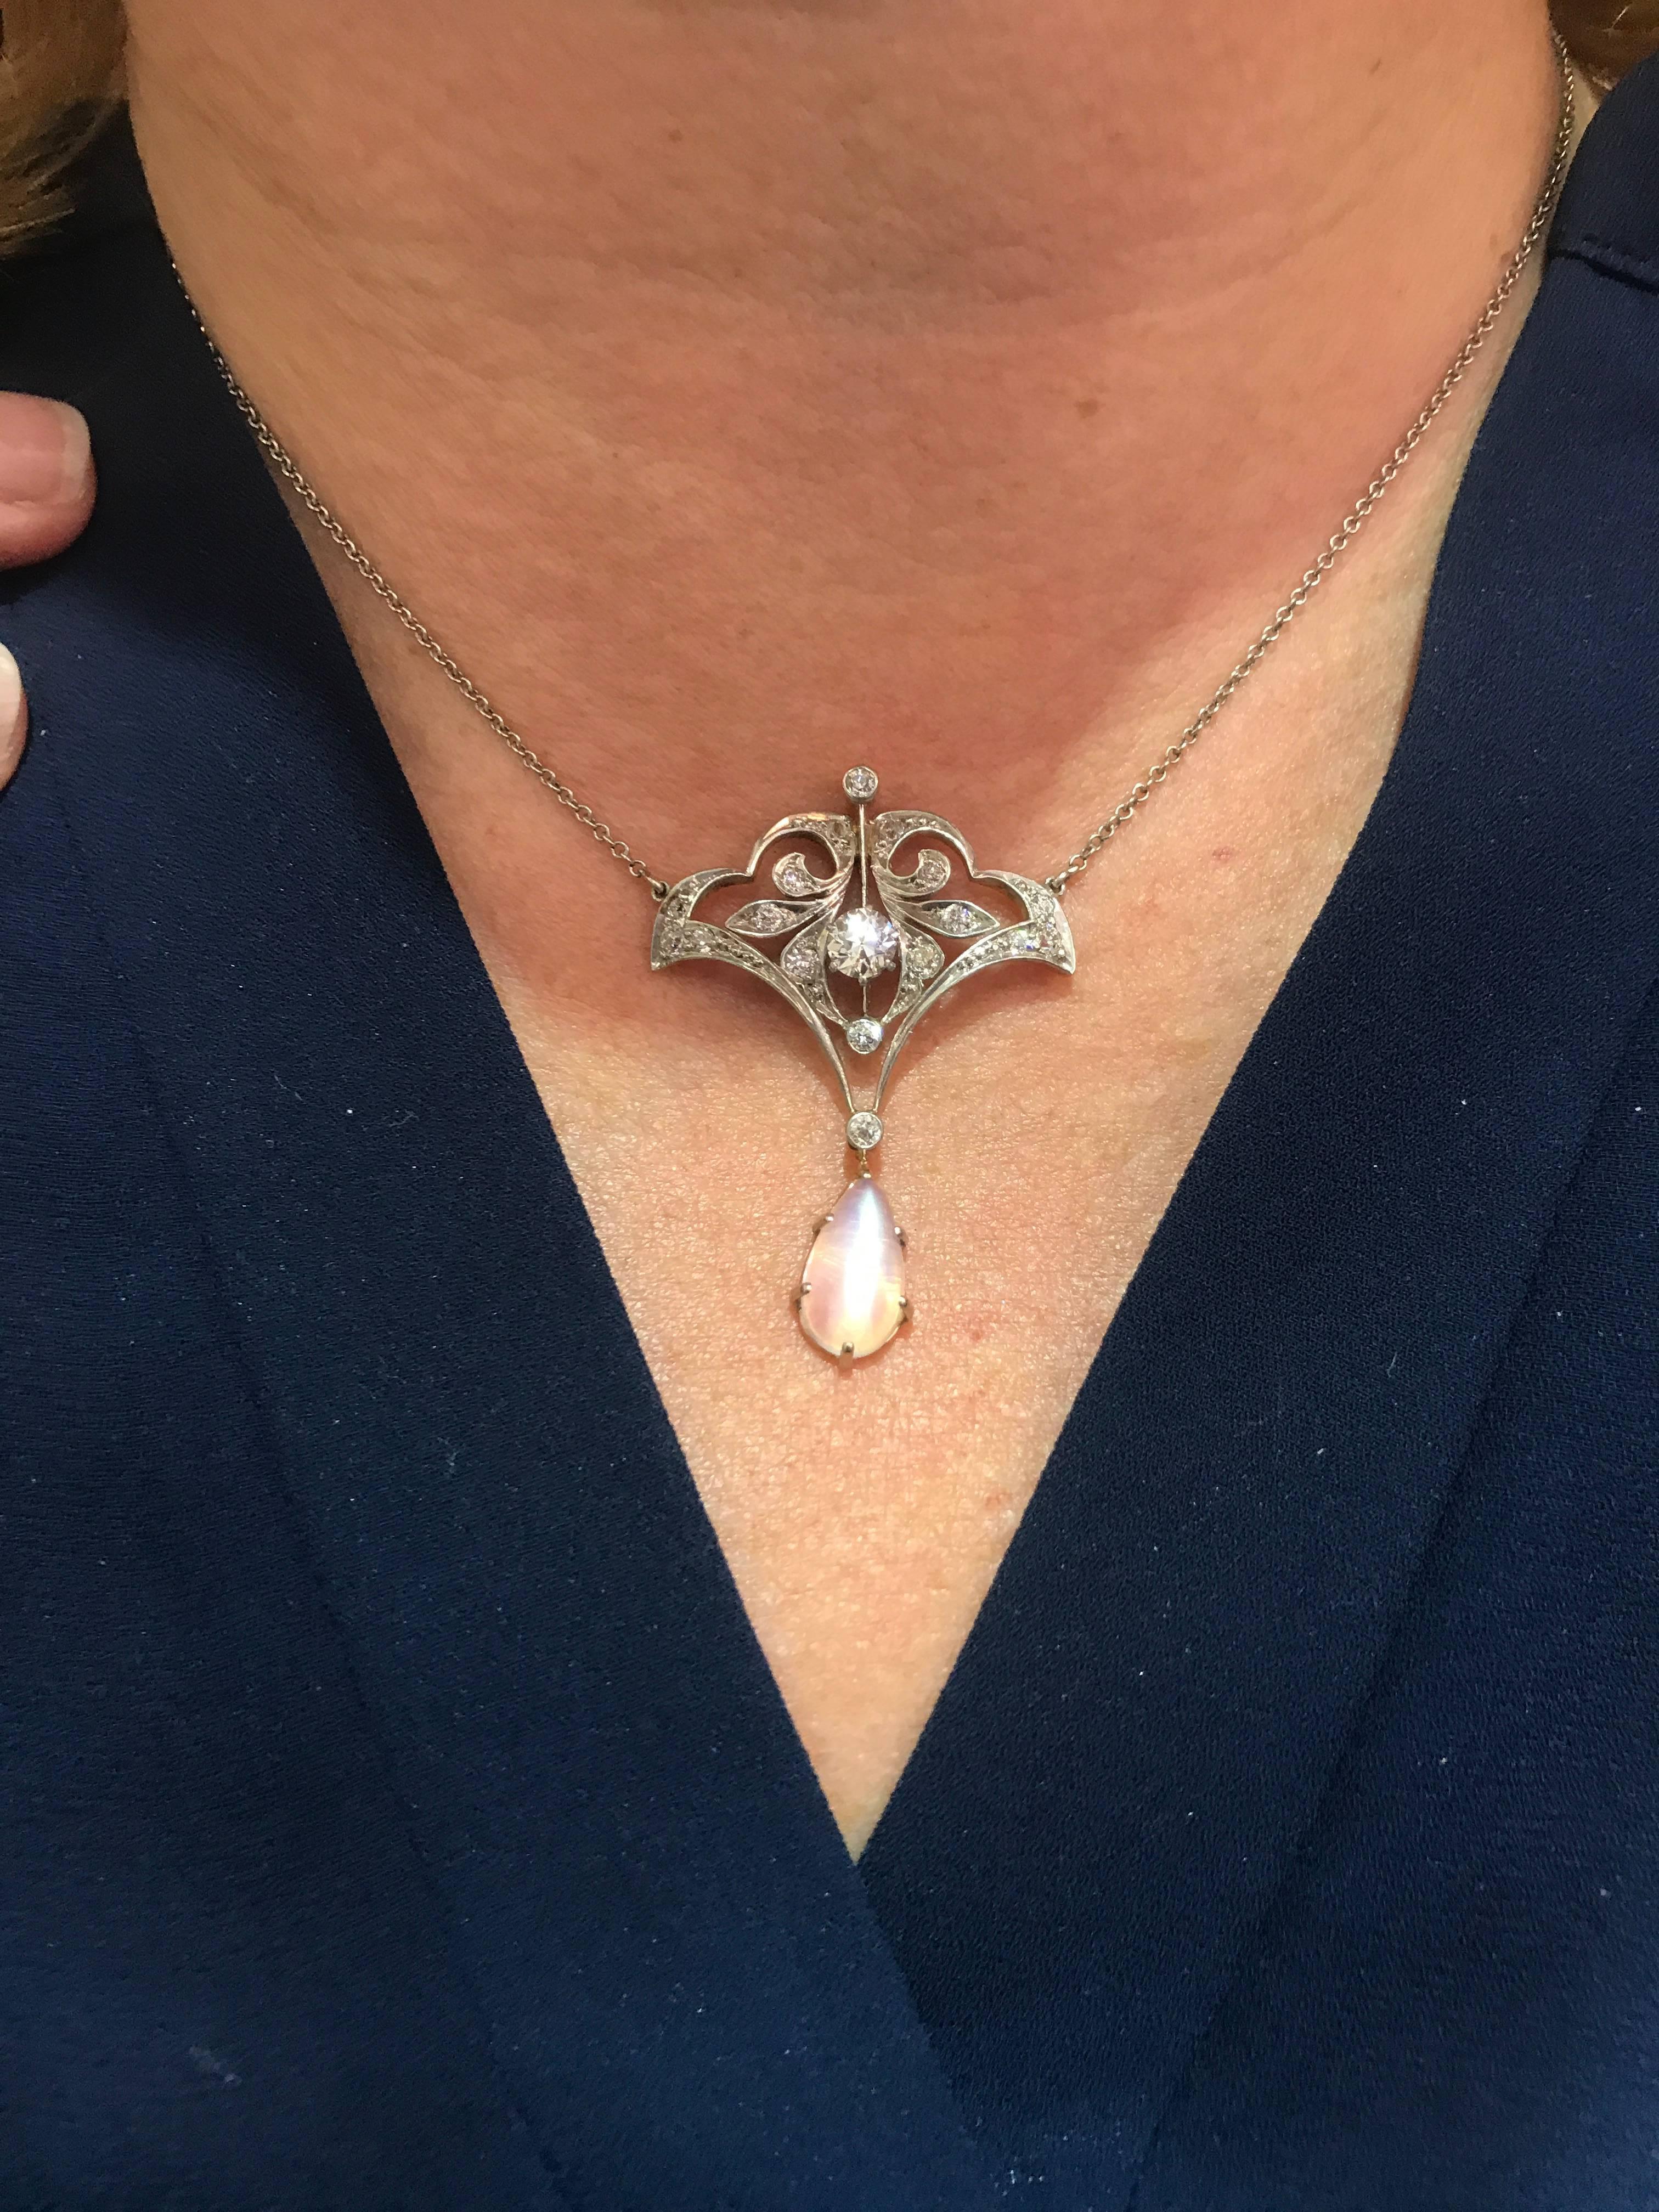 Antique Diamond and Moonstone Pendant set in Platinum and 14 Karat White Gold In Excellent Condition For Sale In New Orleans, LA